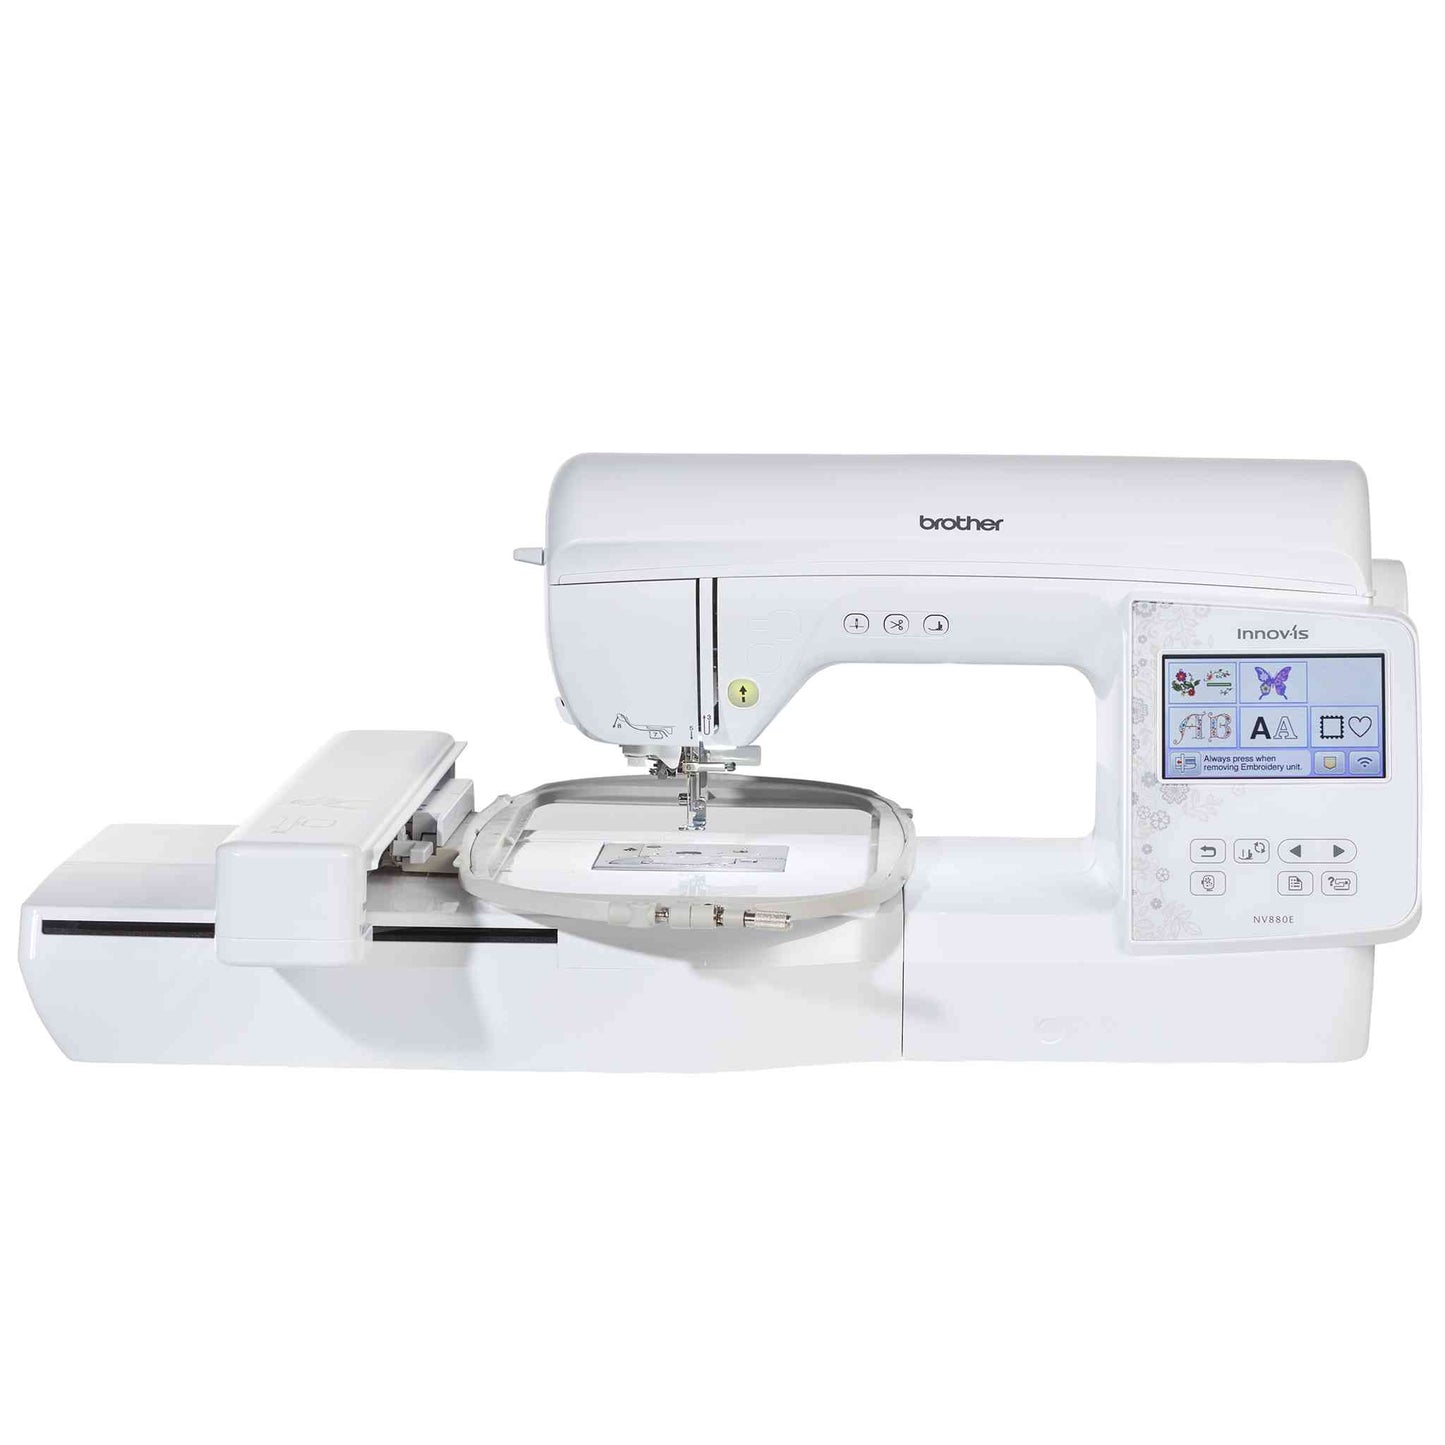 brother nv880e sewing and embroidery machine front view with hoop and embroidery unit attached, no fabric